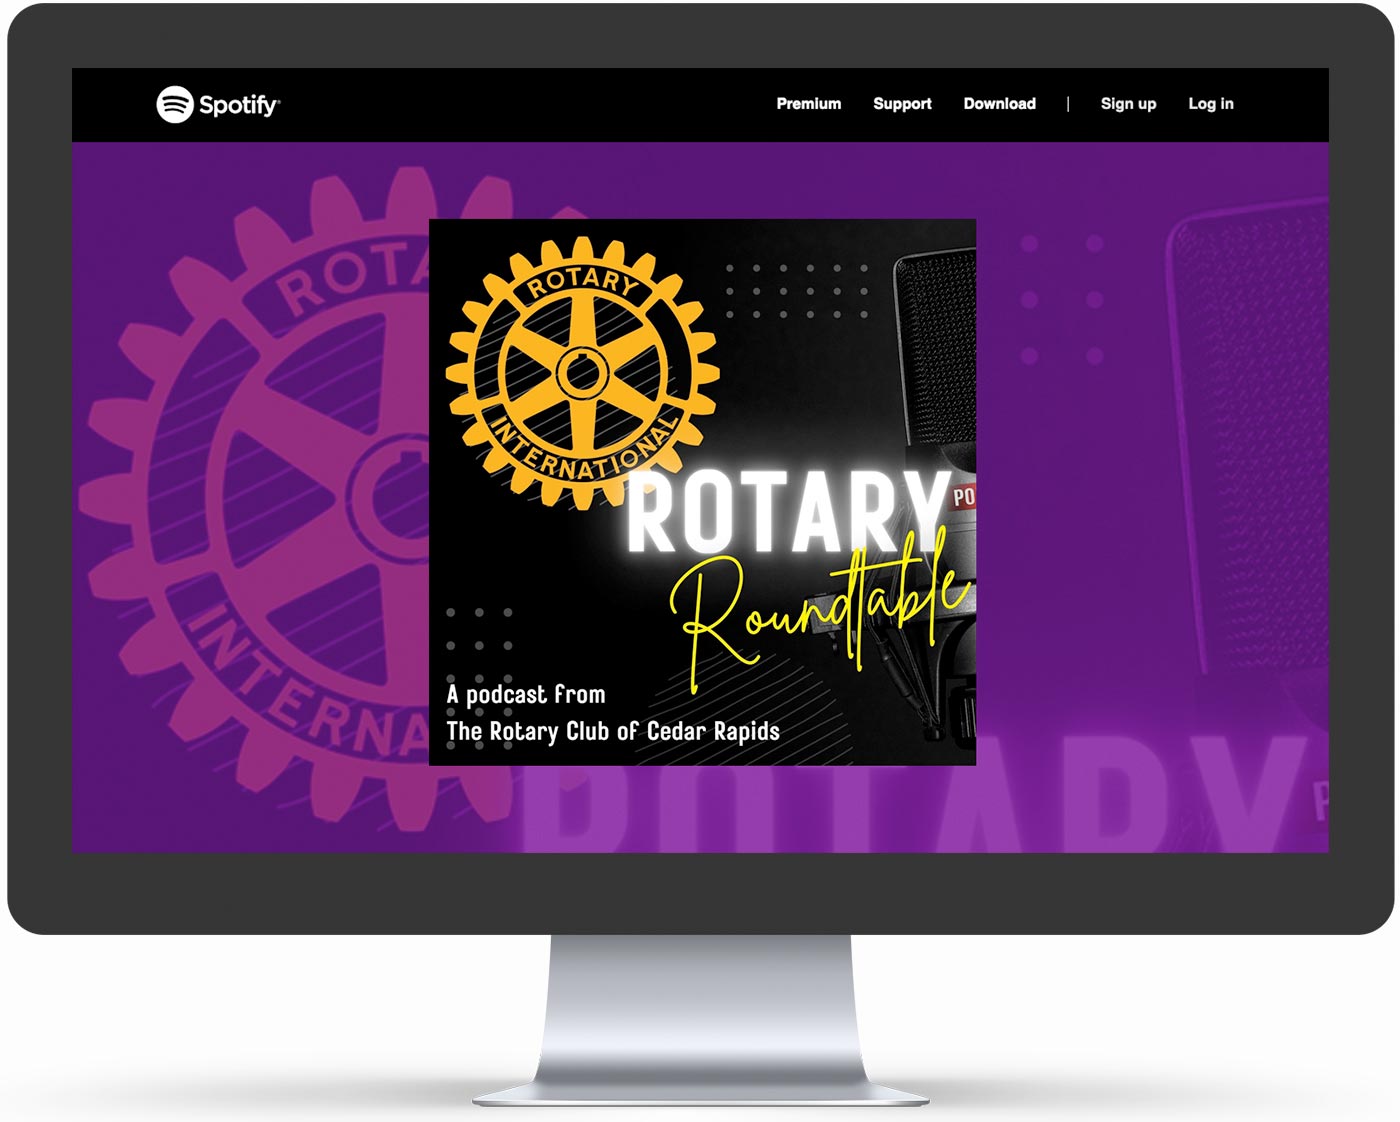 A screenshot of the Rotary Roundtable podcast